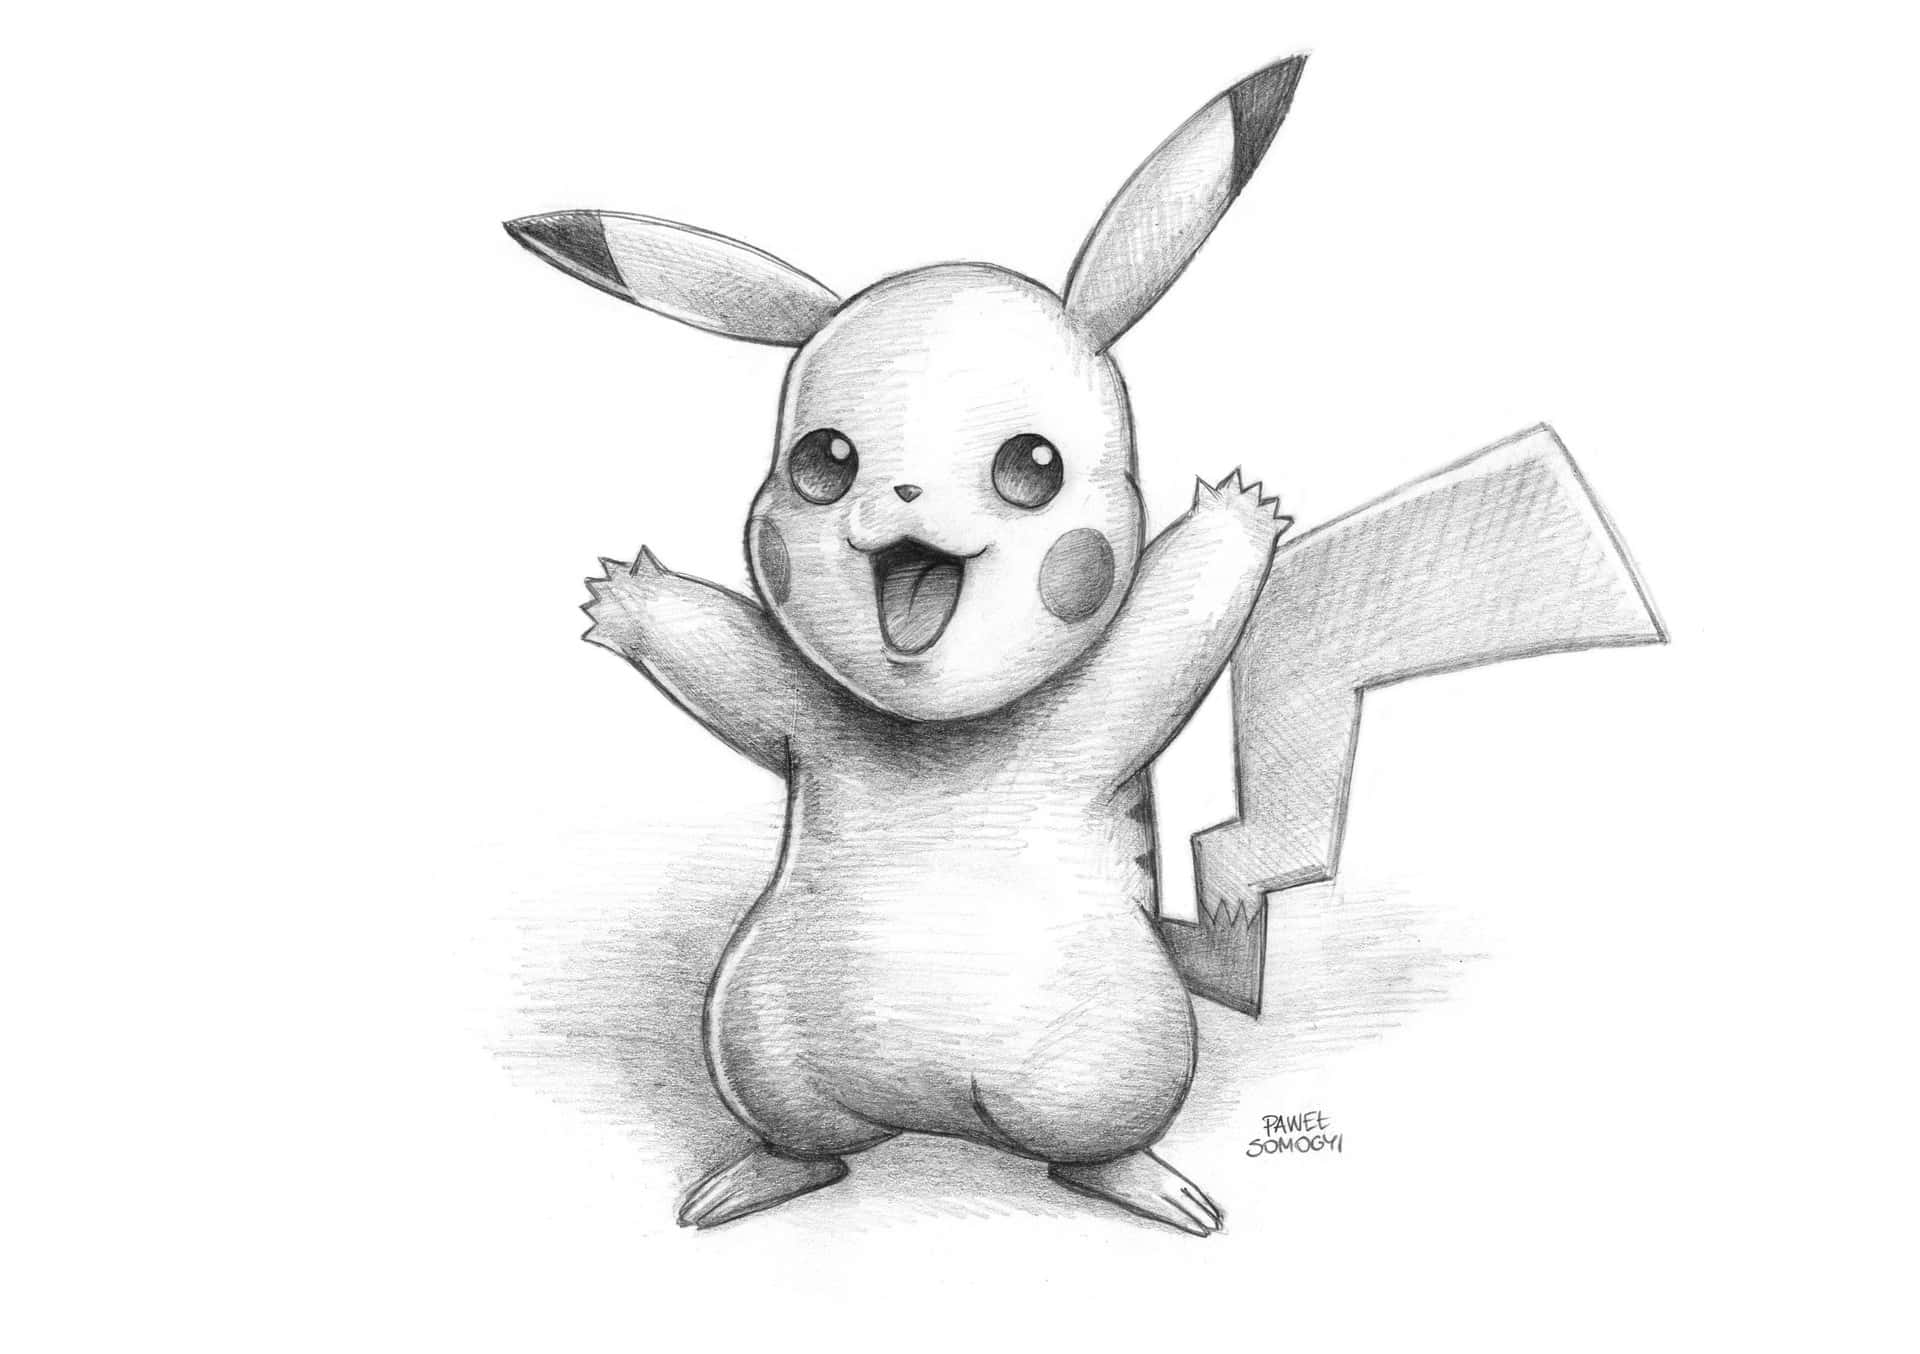 Pikachu Pencil Drawing by PassionisAngelus on DeviantArt